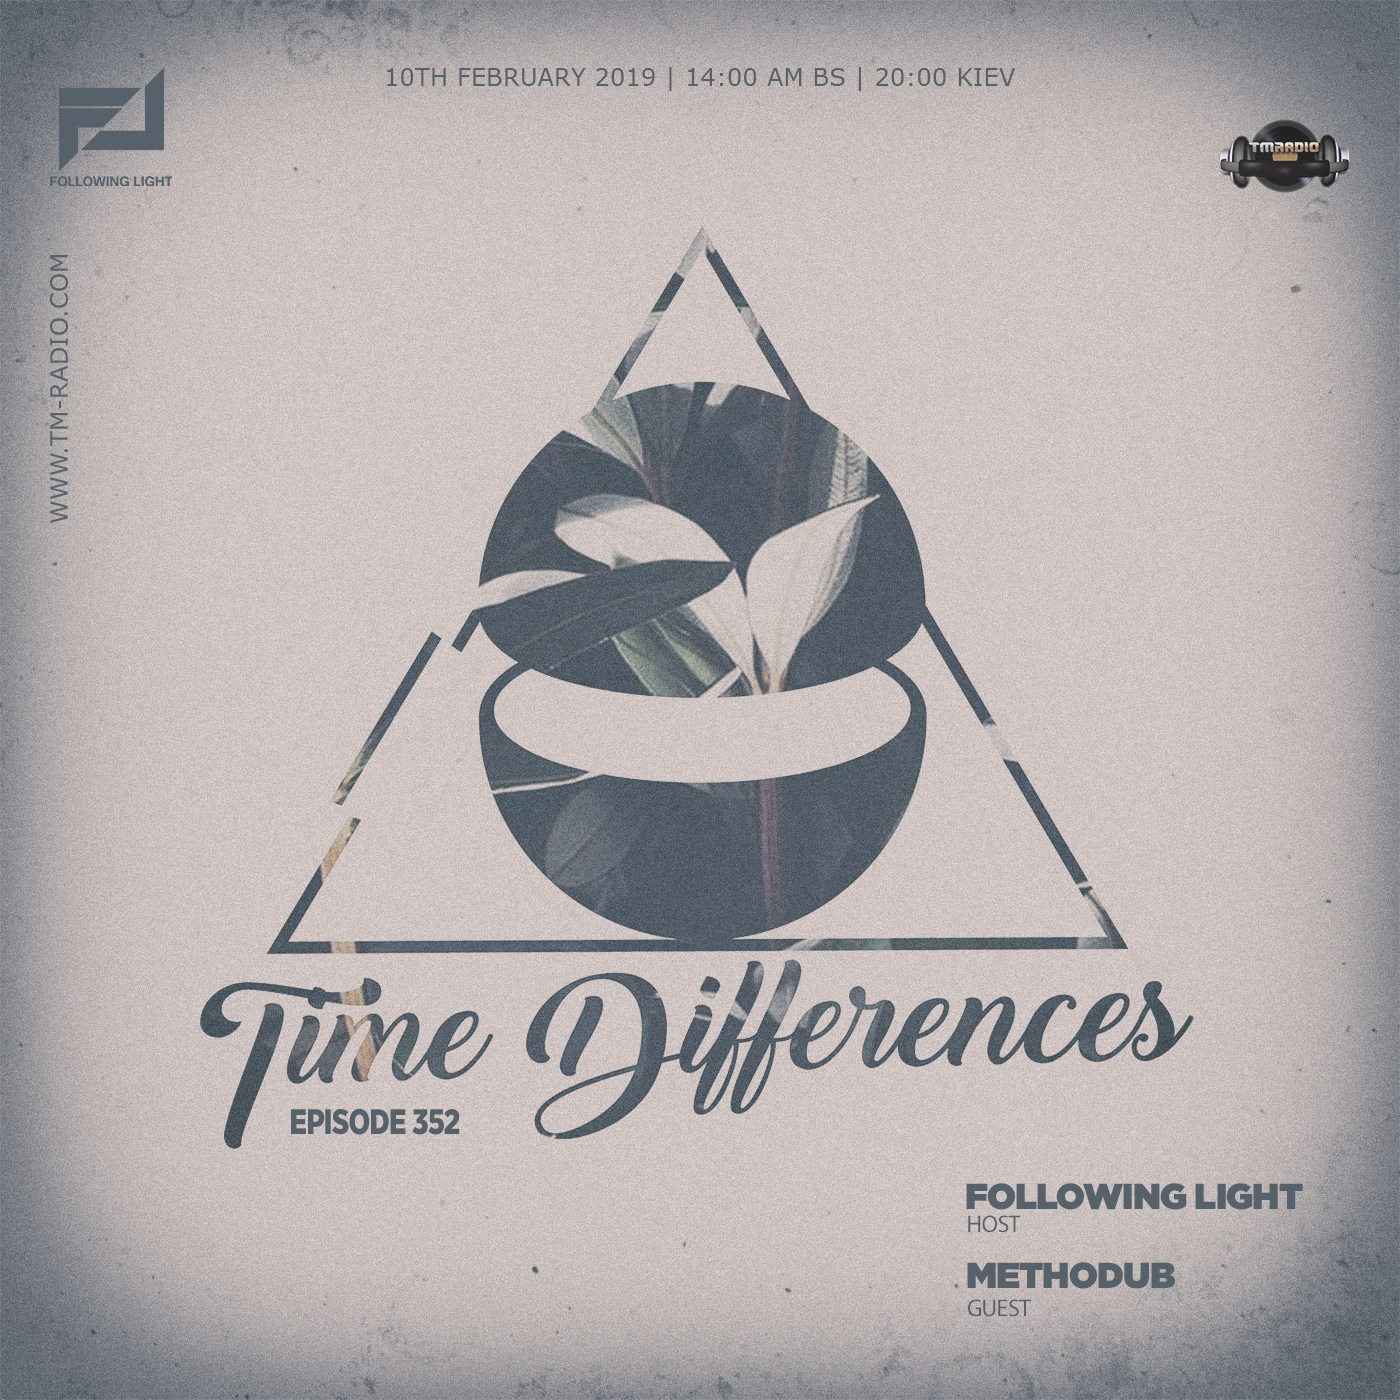 Time Differences :: Episode 352, with host Following Light and guest Methodub (aired on February 10th, 2019) banner logo